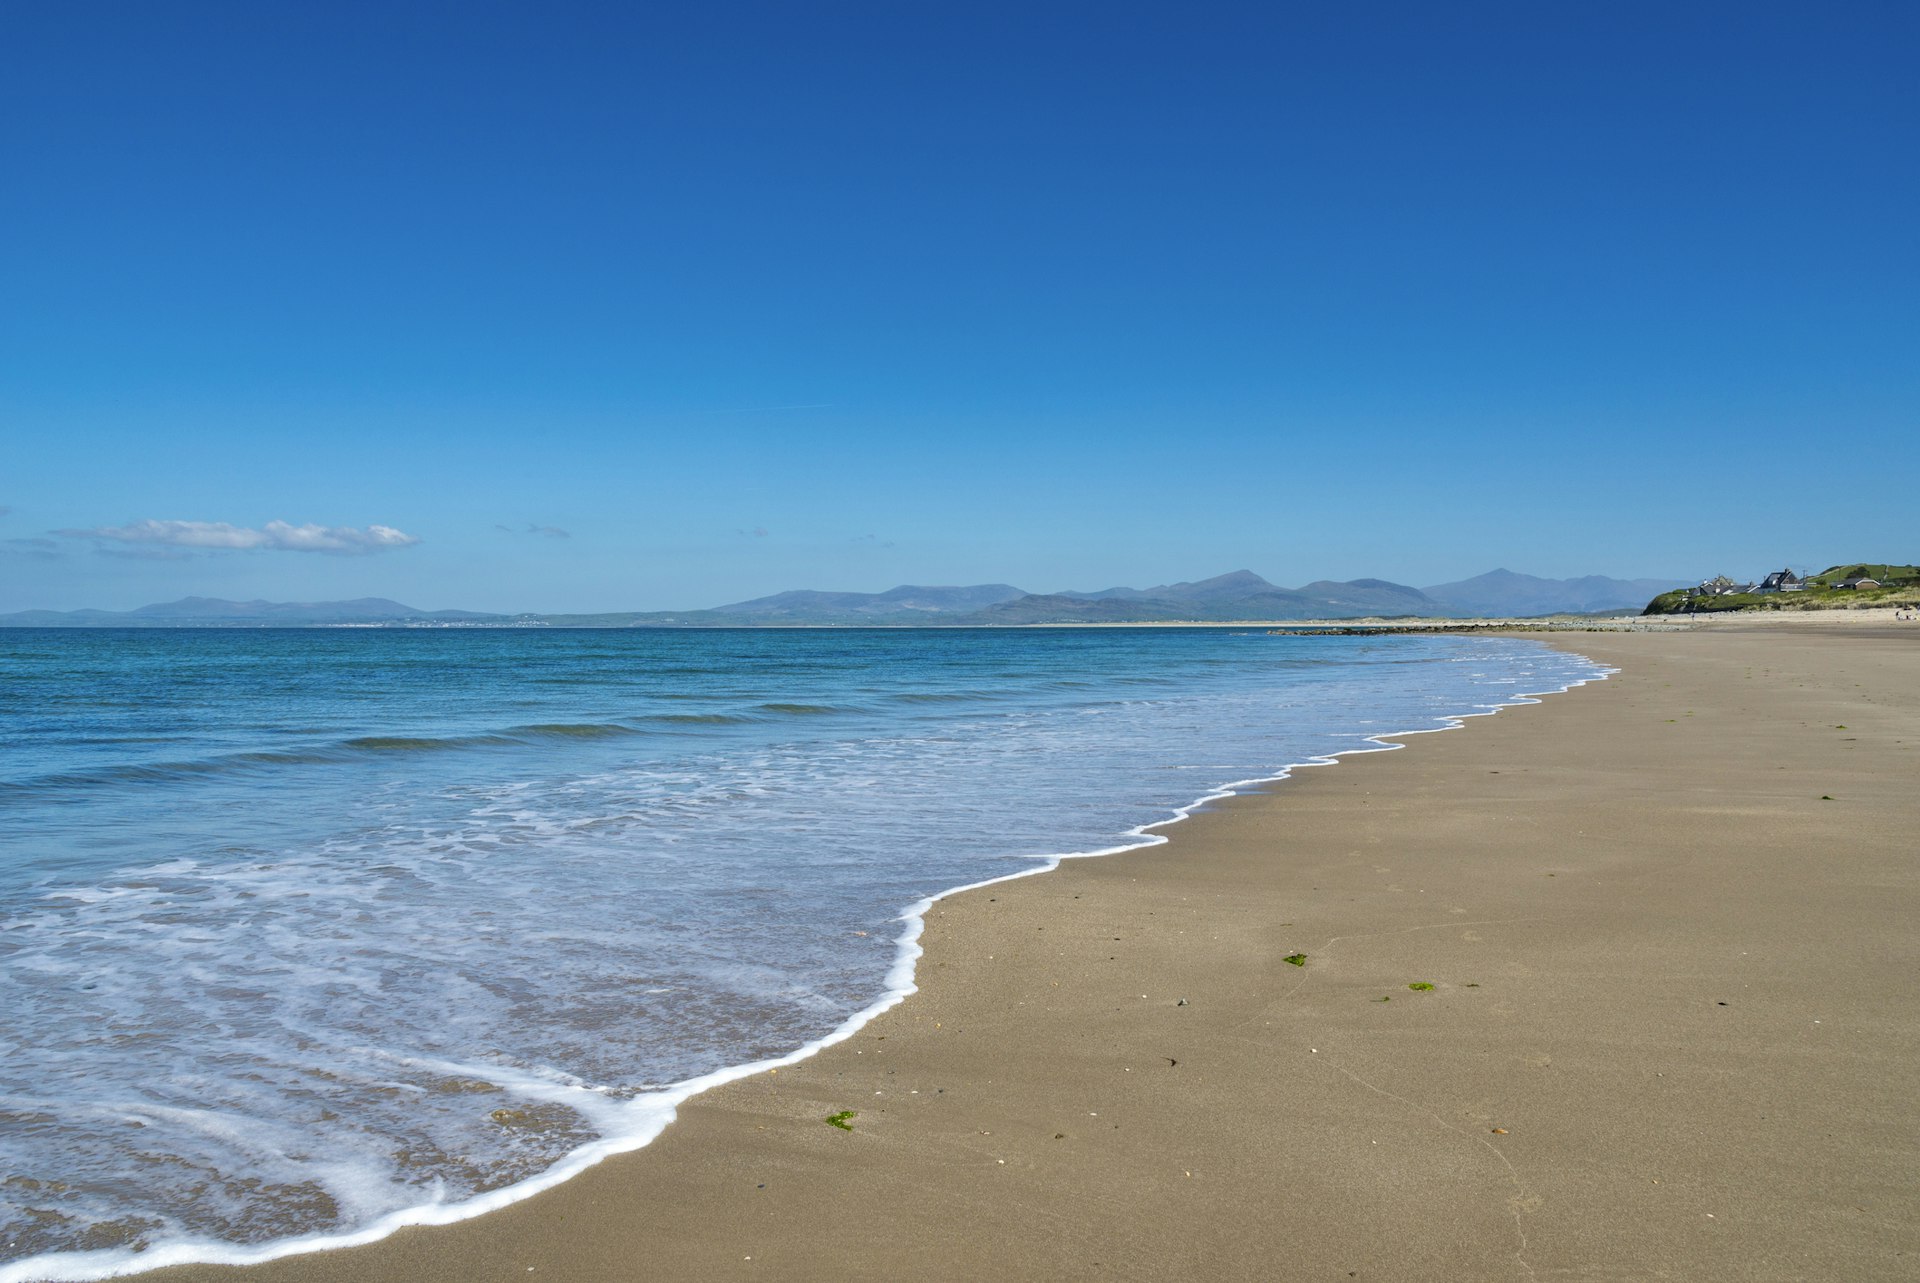 A beautiful beach near Harlech with stunning views to the mountains of Snowdonia in the distance, Snowdonia, North Wales